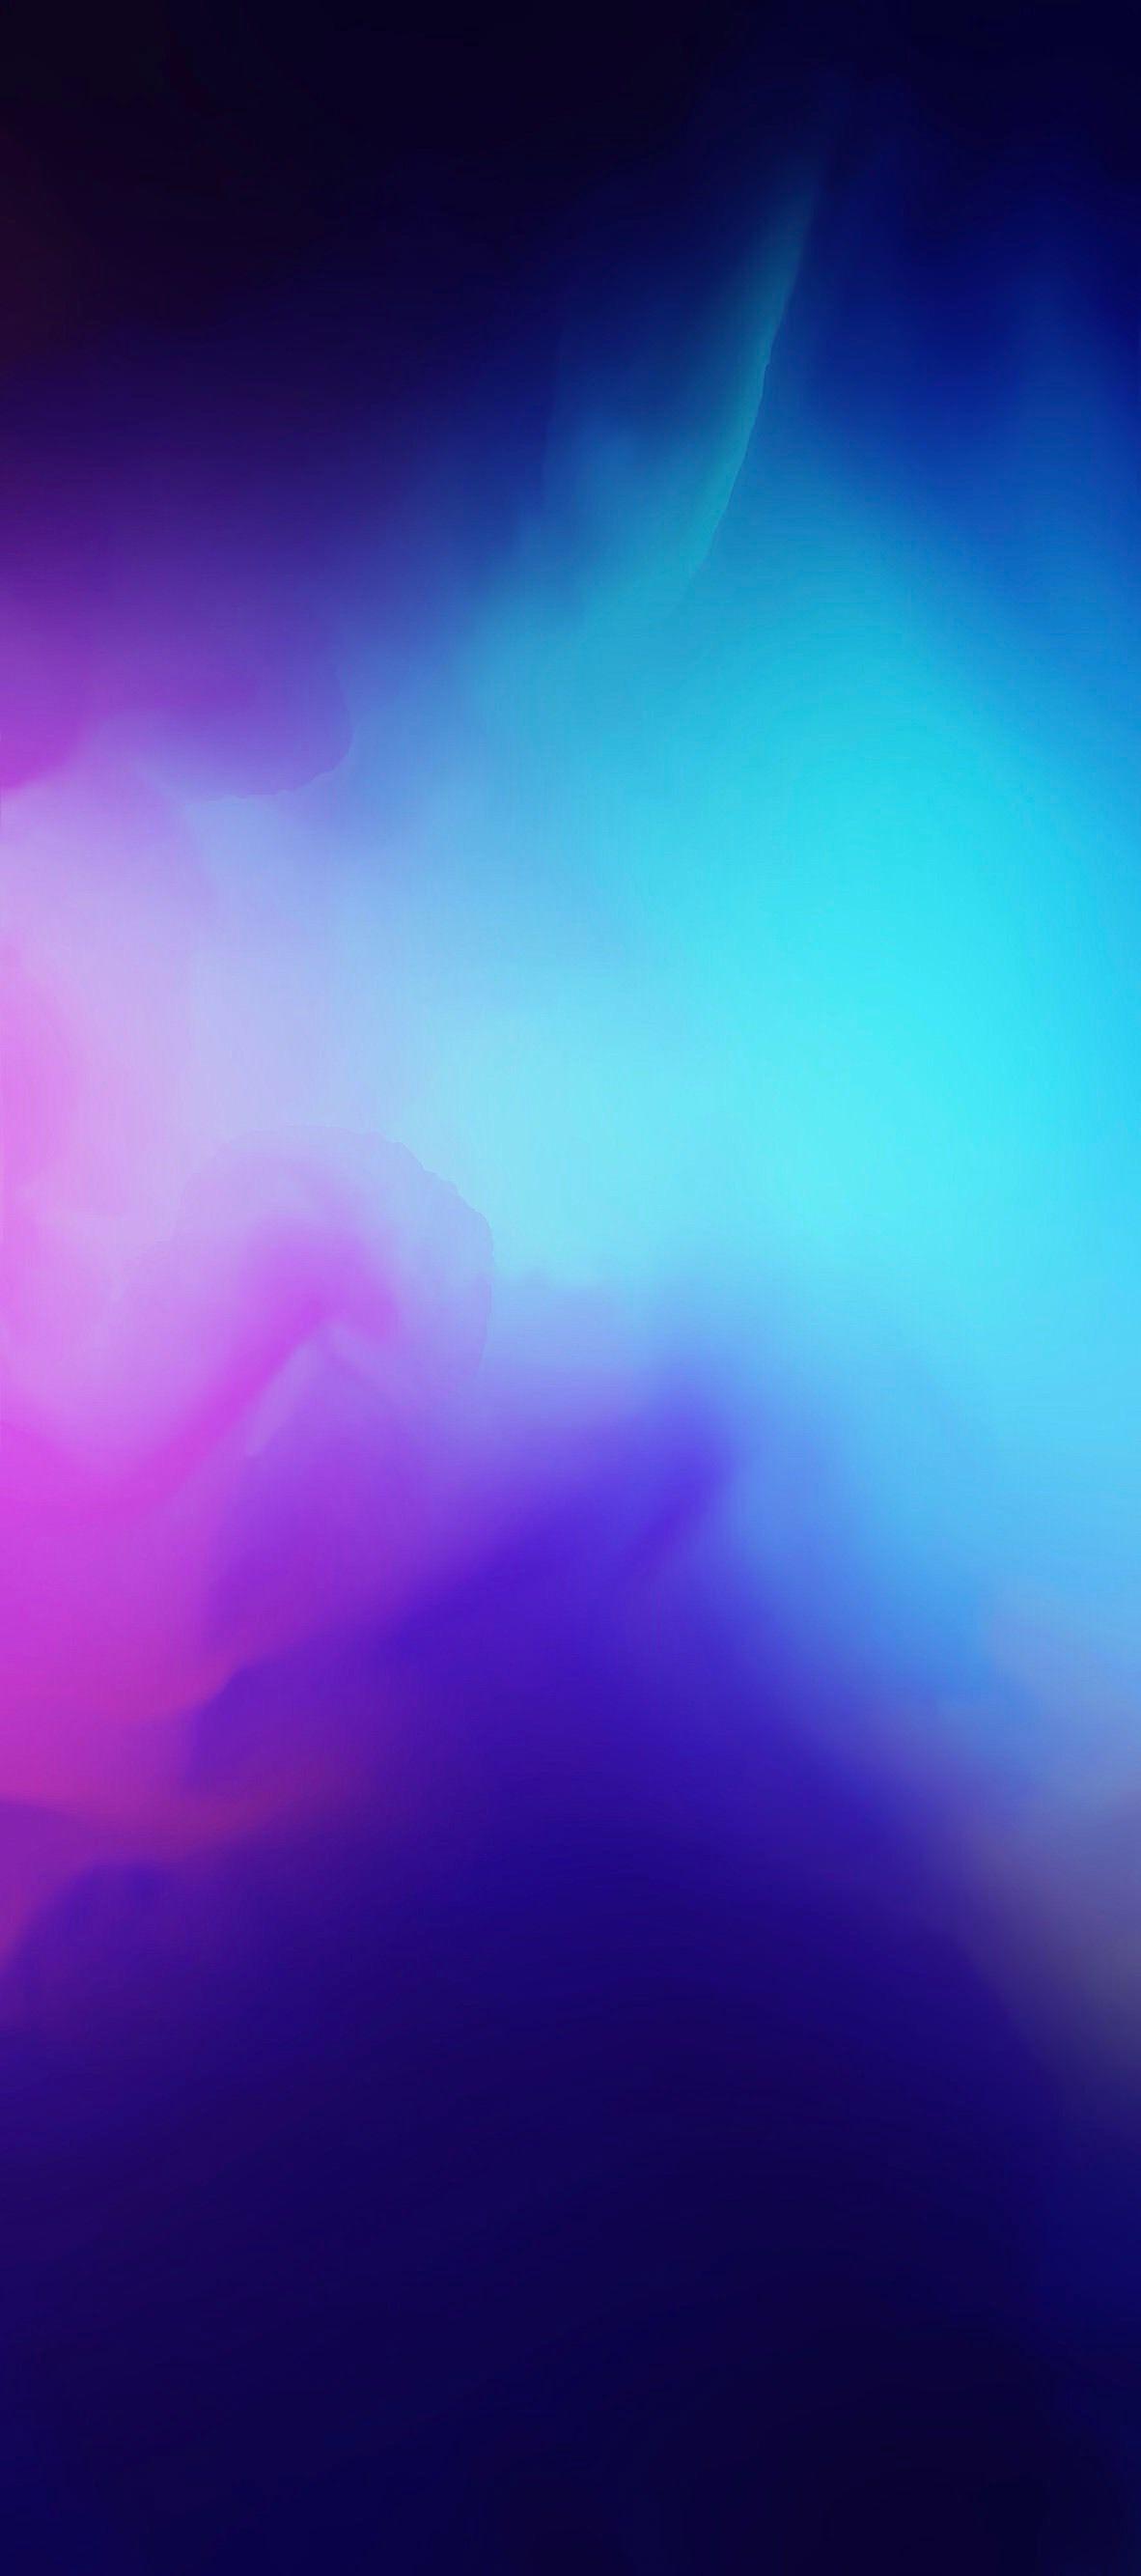 iOS iPhone X, blue, purple, abstract, apple, wallpaper, iphone 8